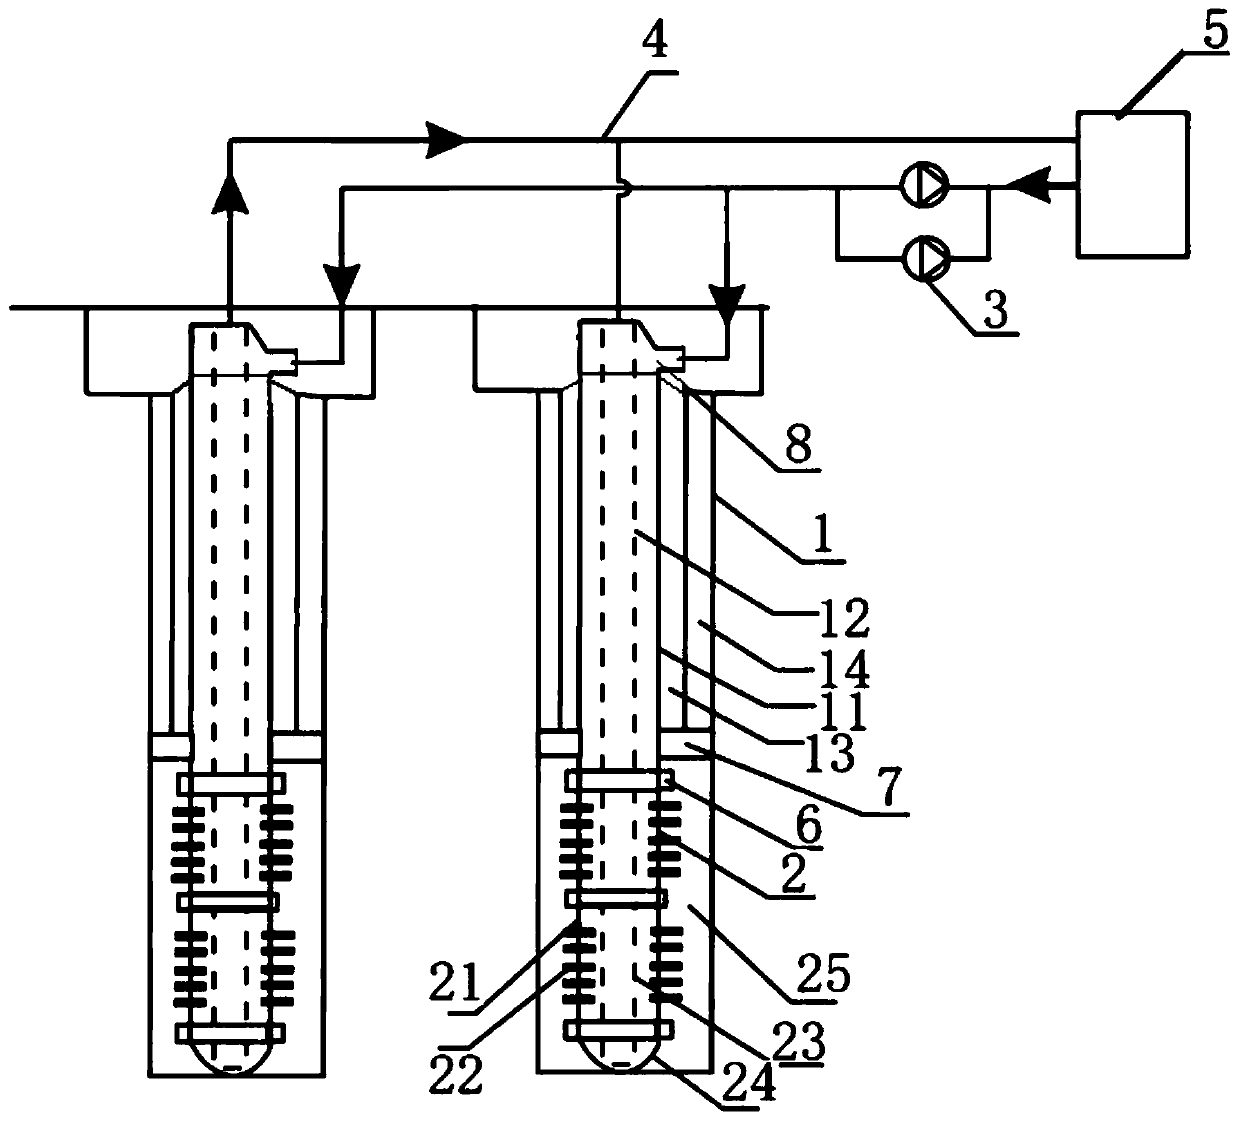 Geothermal well micro heat pipe heat exchange device and system